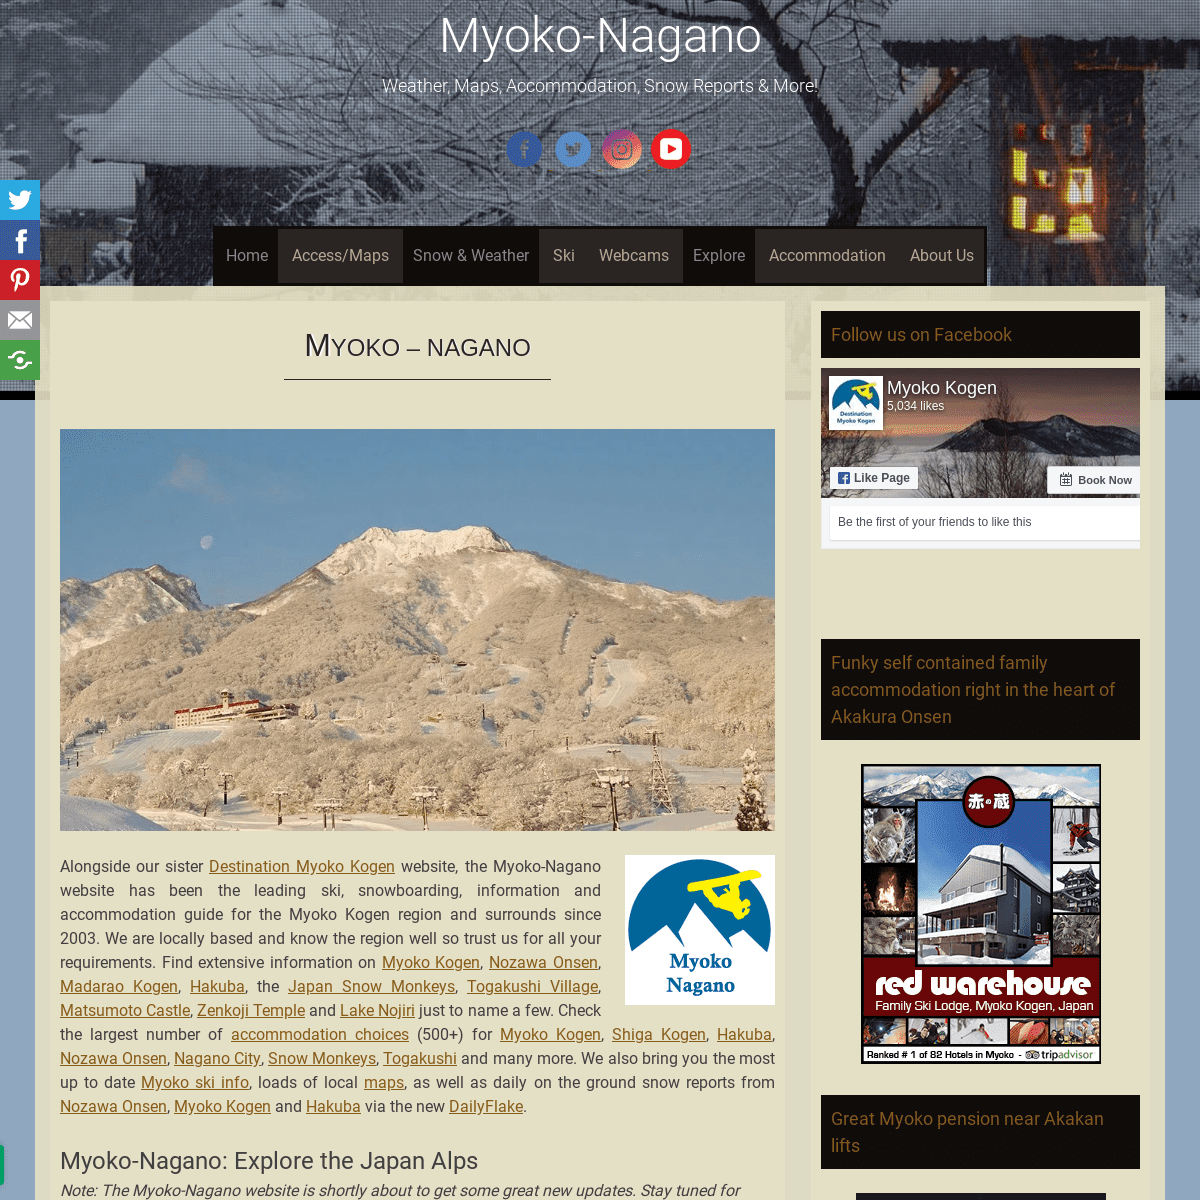 Myoko-Nagano: Information and accommodation guide for the Japan Alps